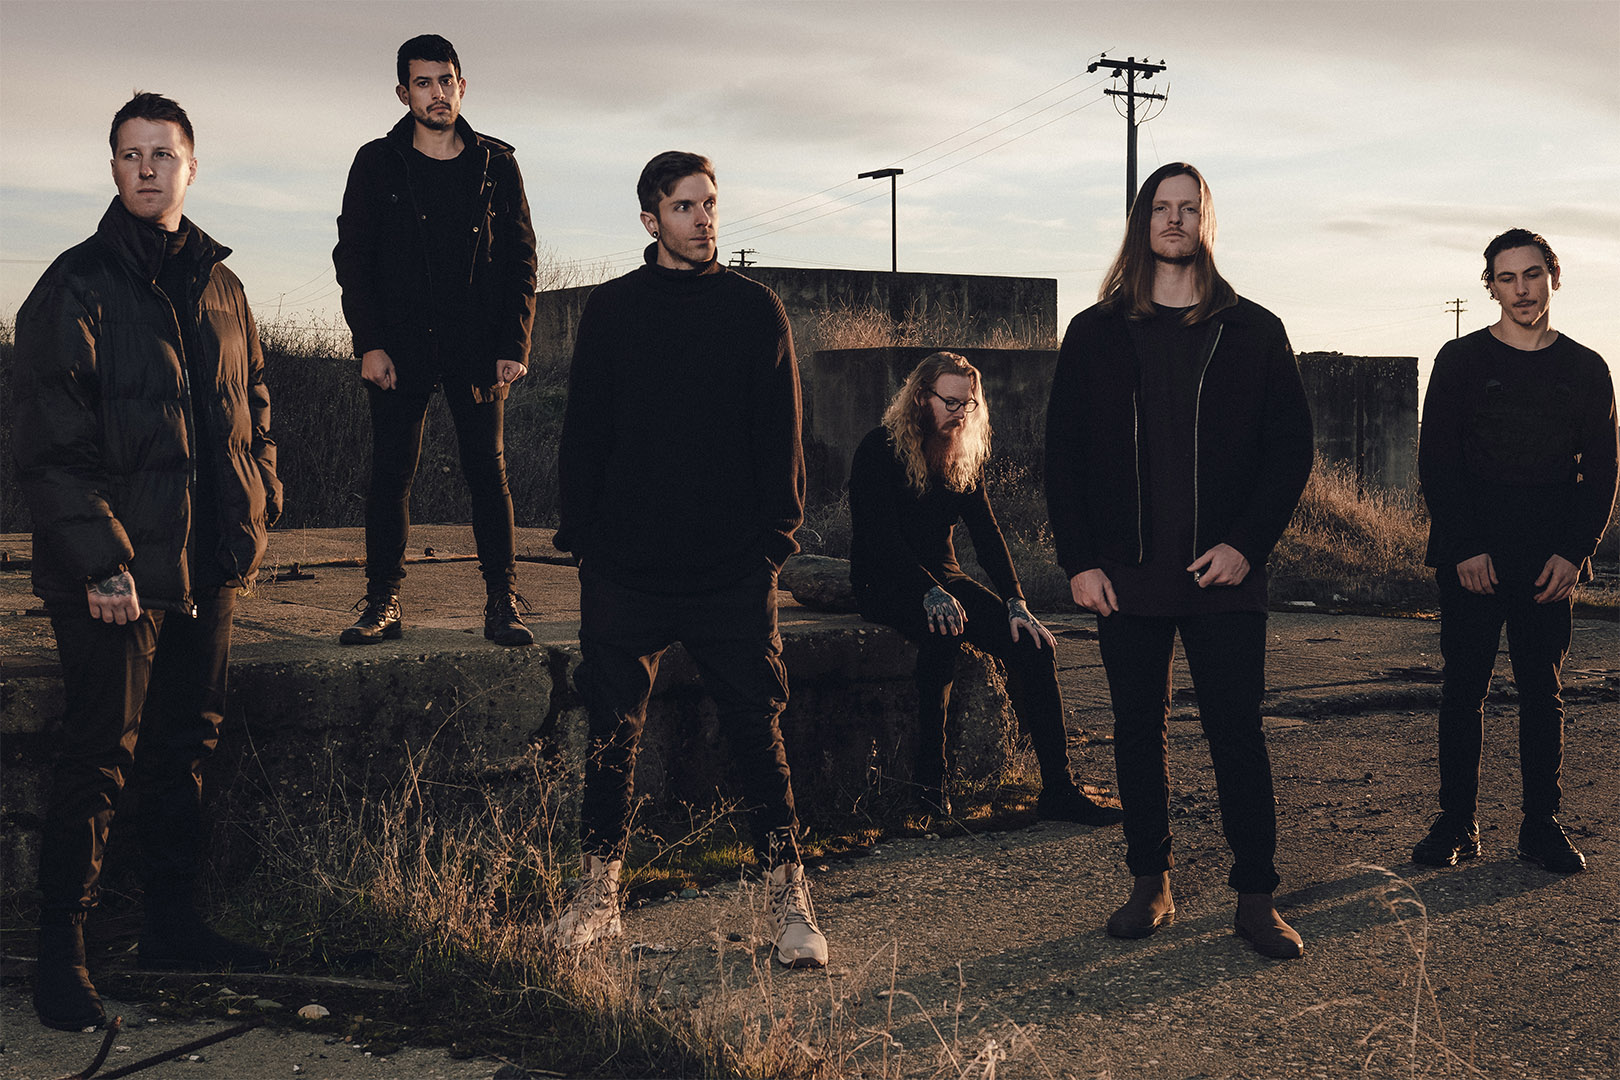 KINGDOM OF GIANTS RELEASE MUSIC VIDEO FOR NEW SINGLE “WAYFINDER”